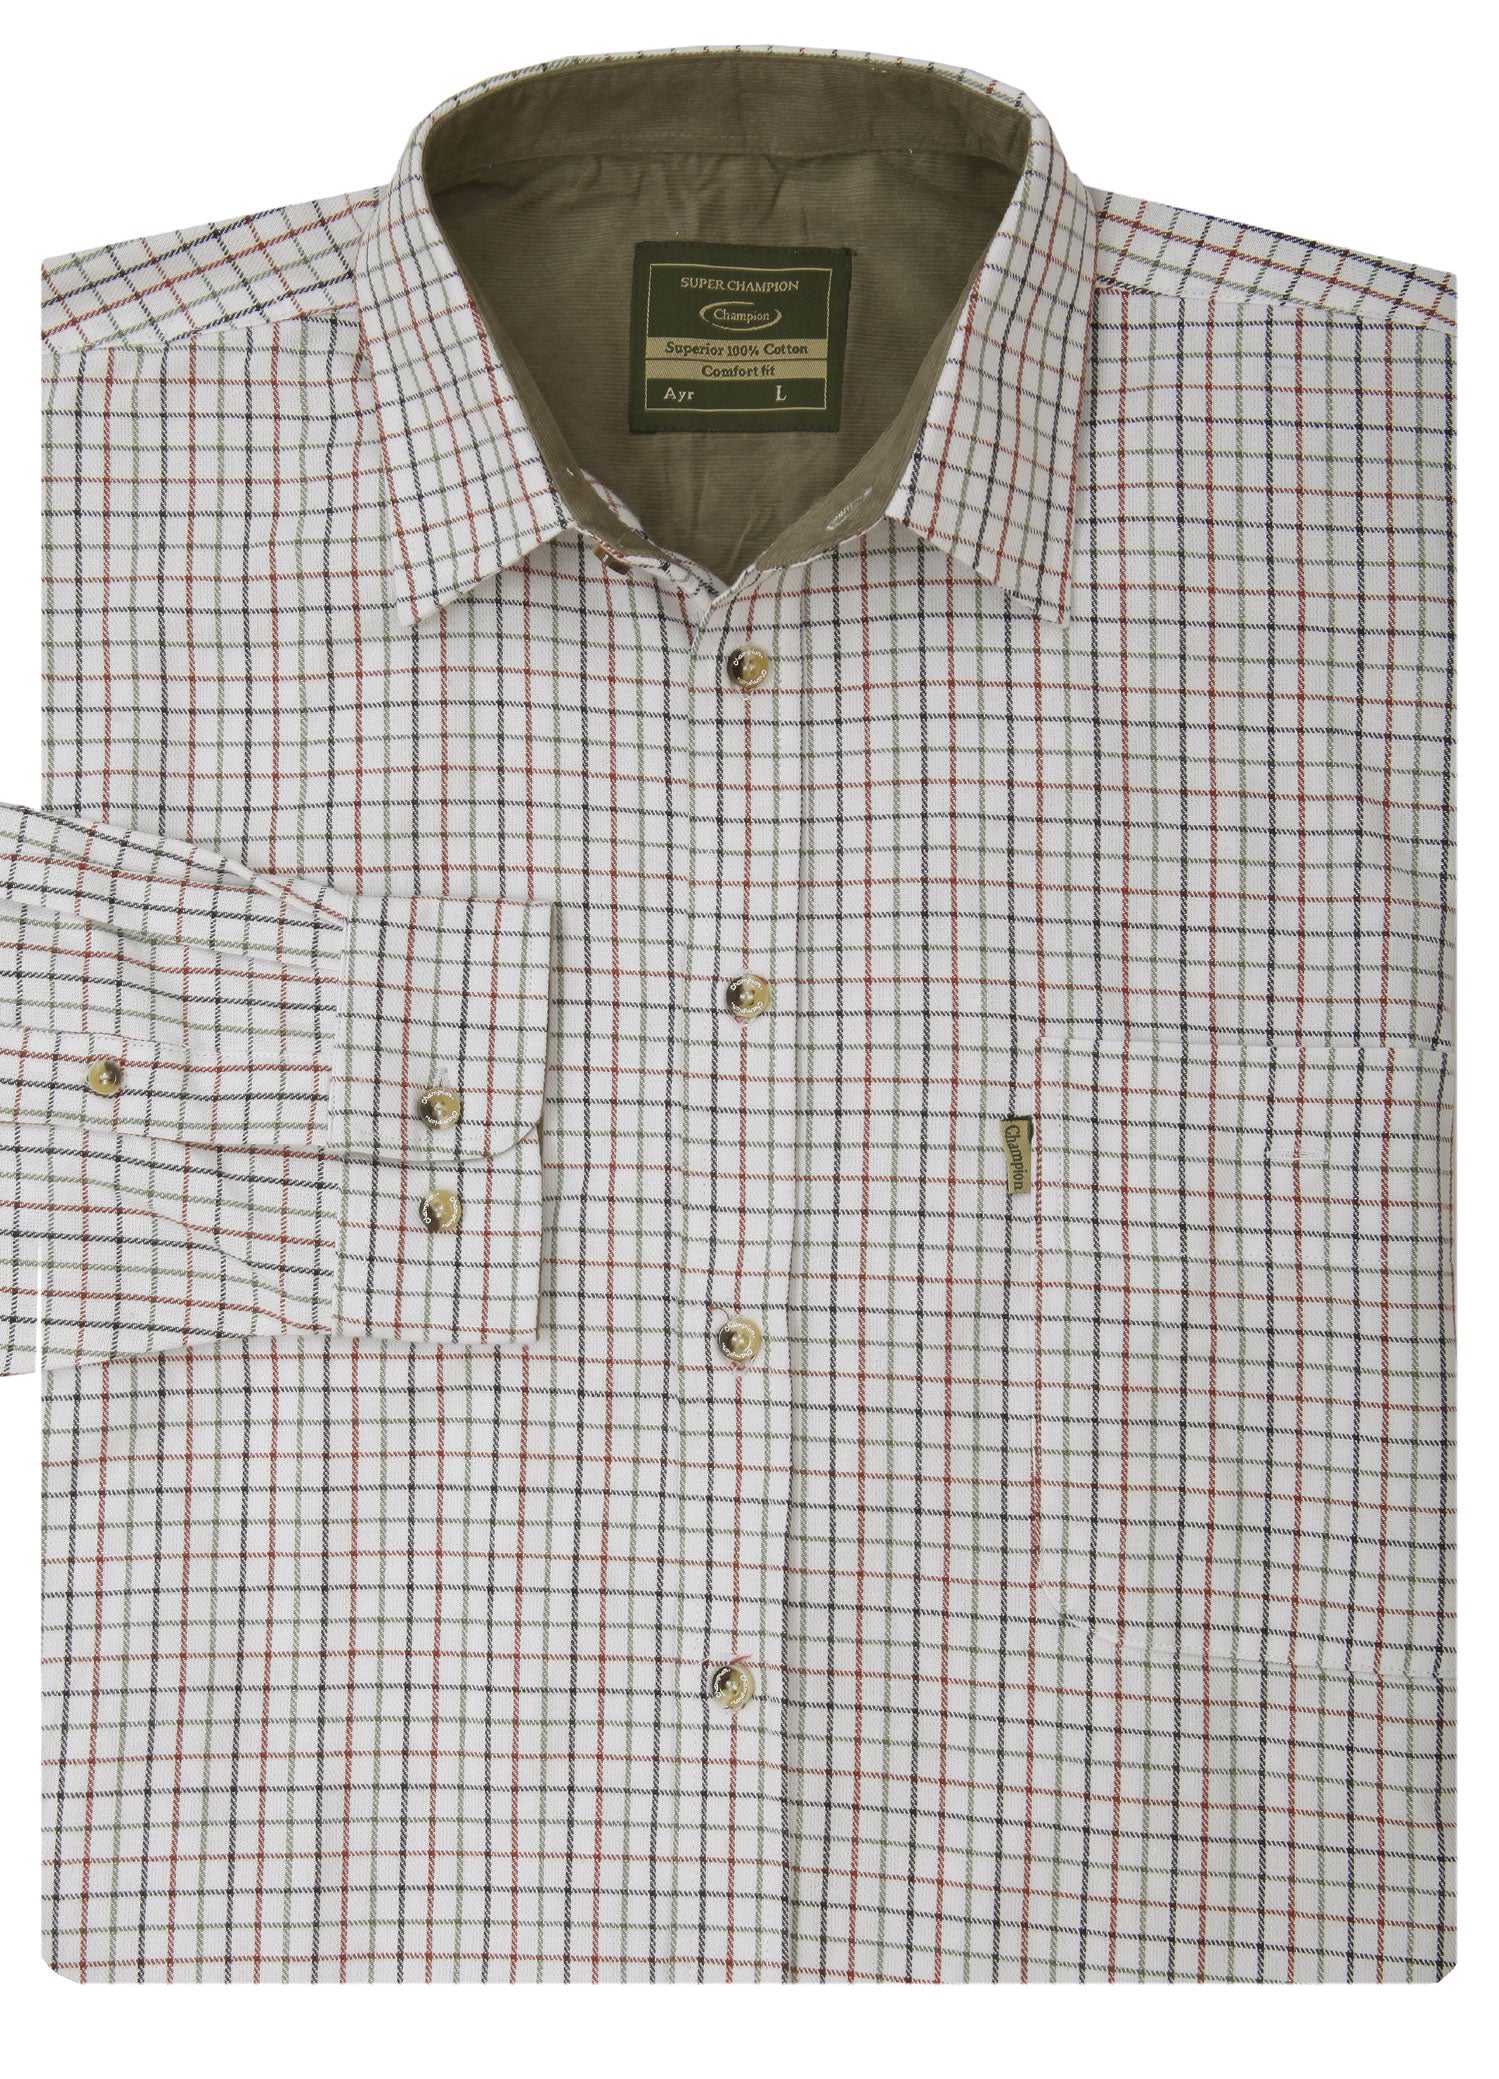 Ayr tattersall shirt with cord trim 